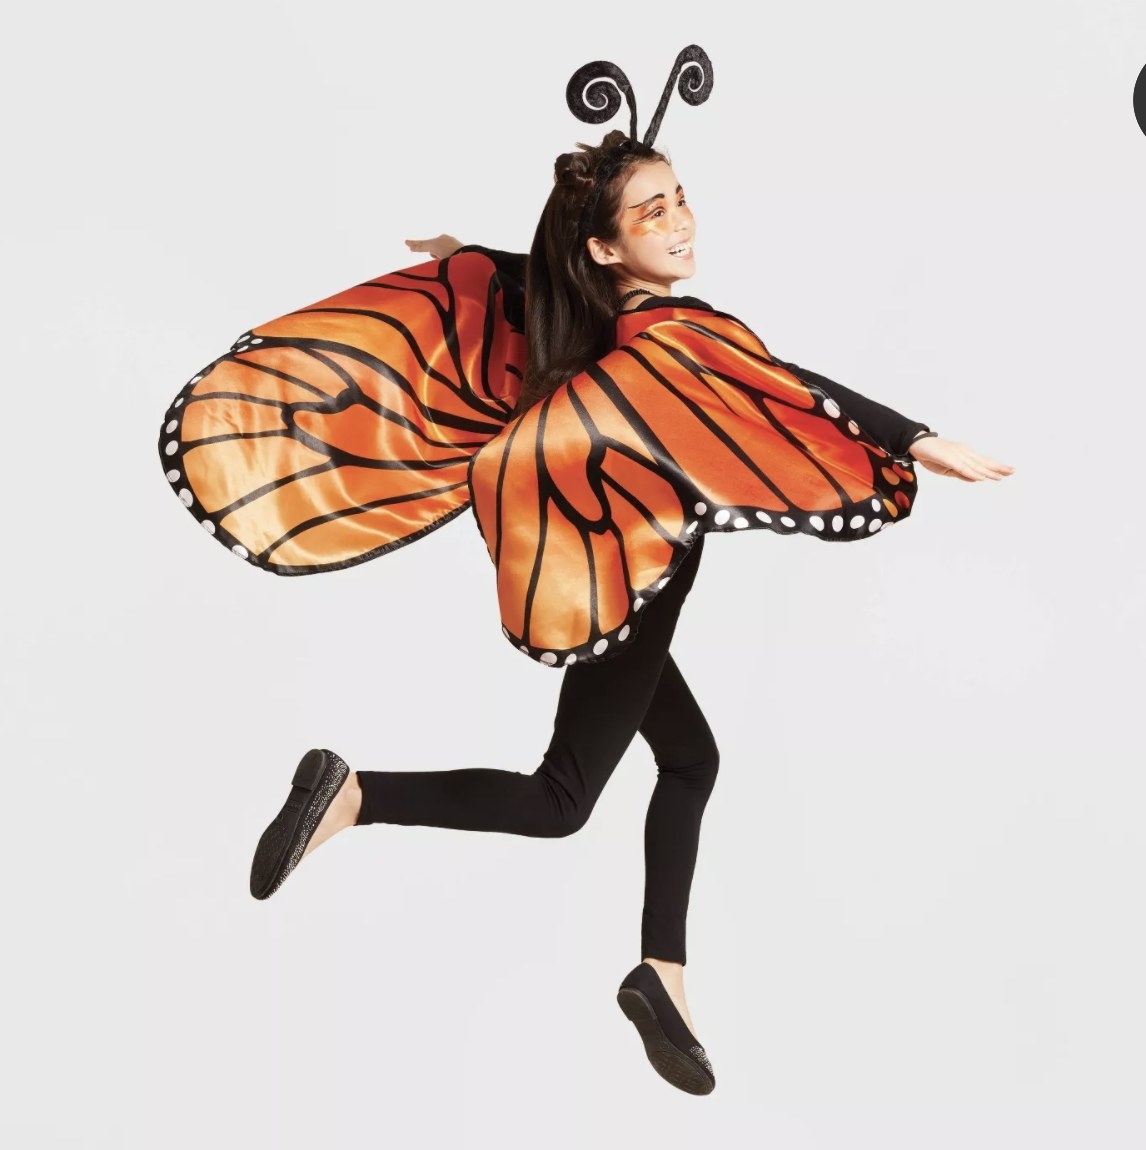 A child wears the orange and black wings and jumps into the air